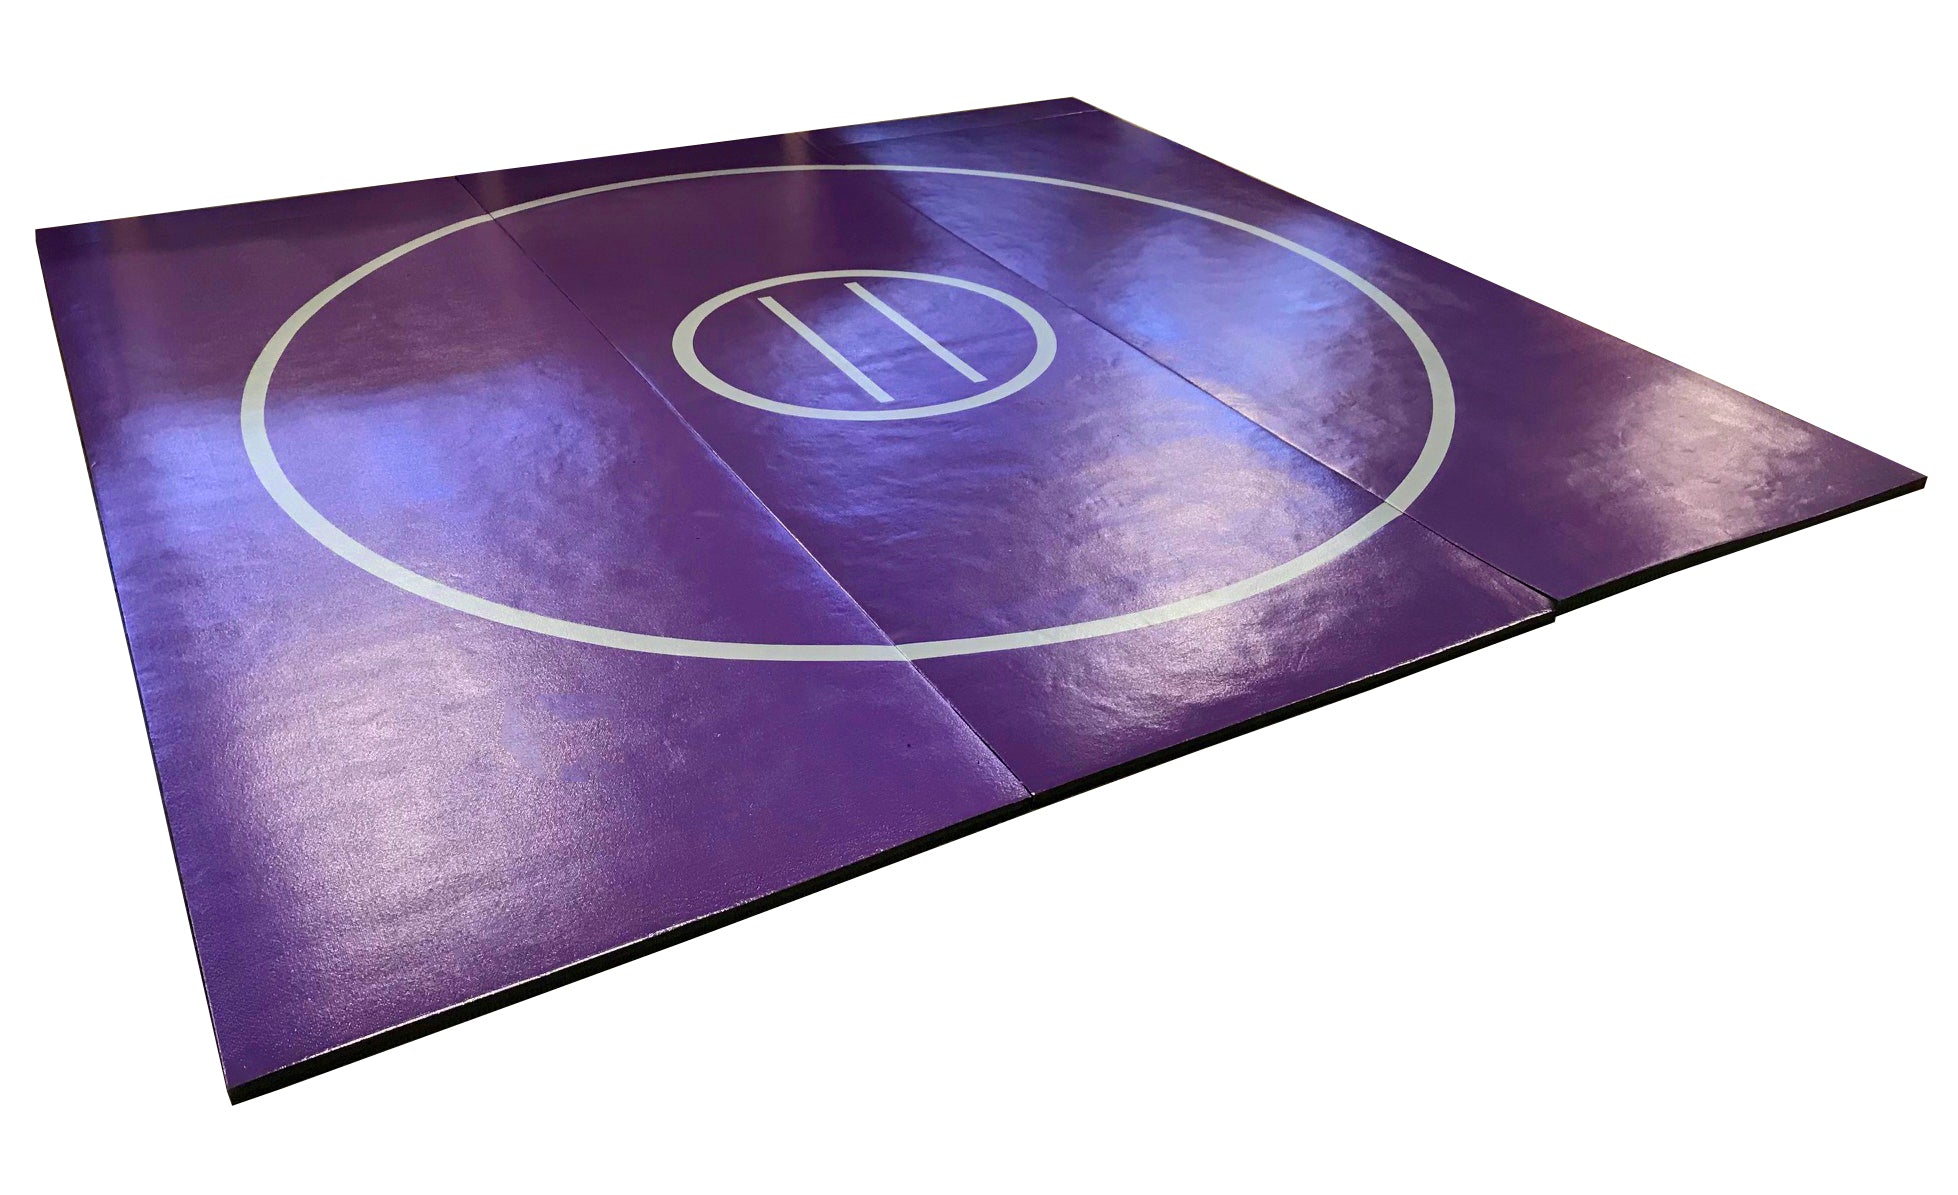 12' x 12' x 1 3/8" Purple and Gray Roll-Up Wrestling Mat